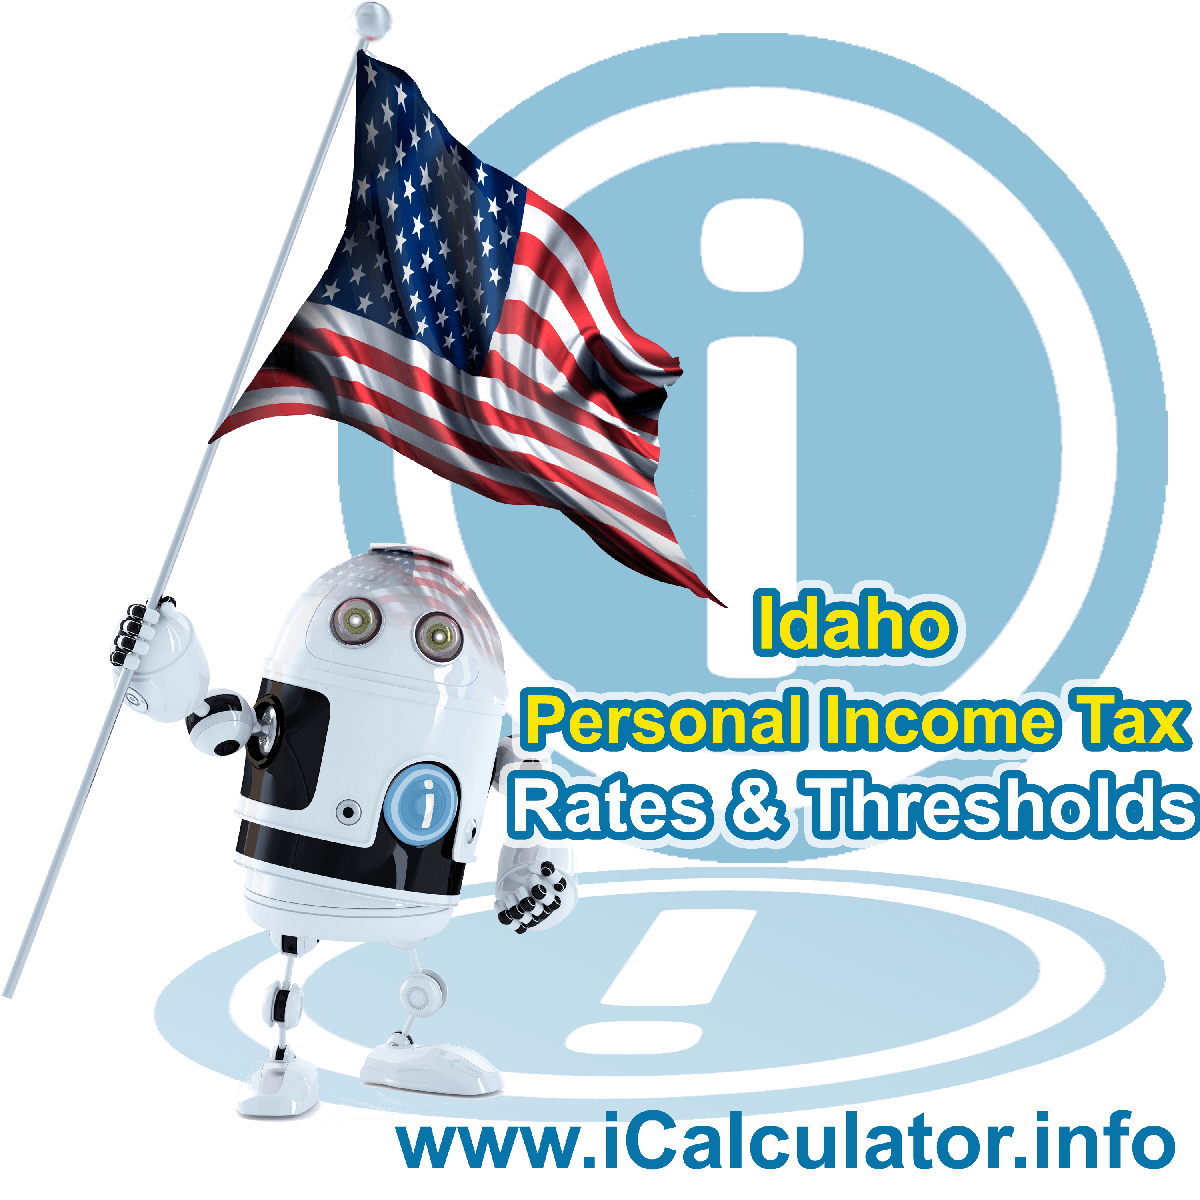 Idaho State Tax Tables 2016. This image displays details of the Idaho State Tax Tables for the 2016 tax return year which is provided in support of the 2016 US Tax Calculator